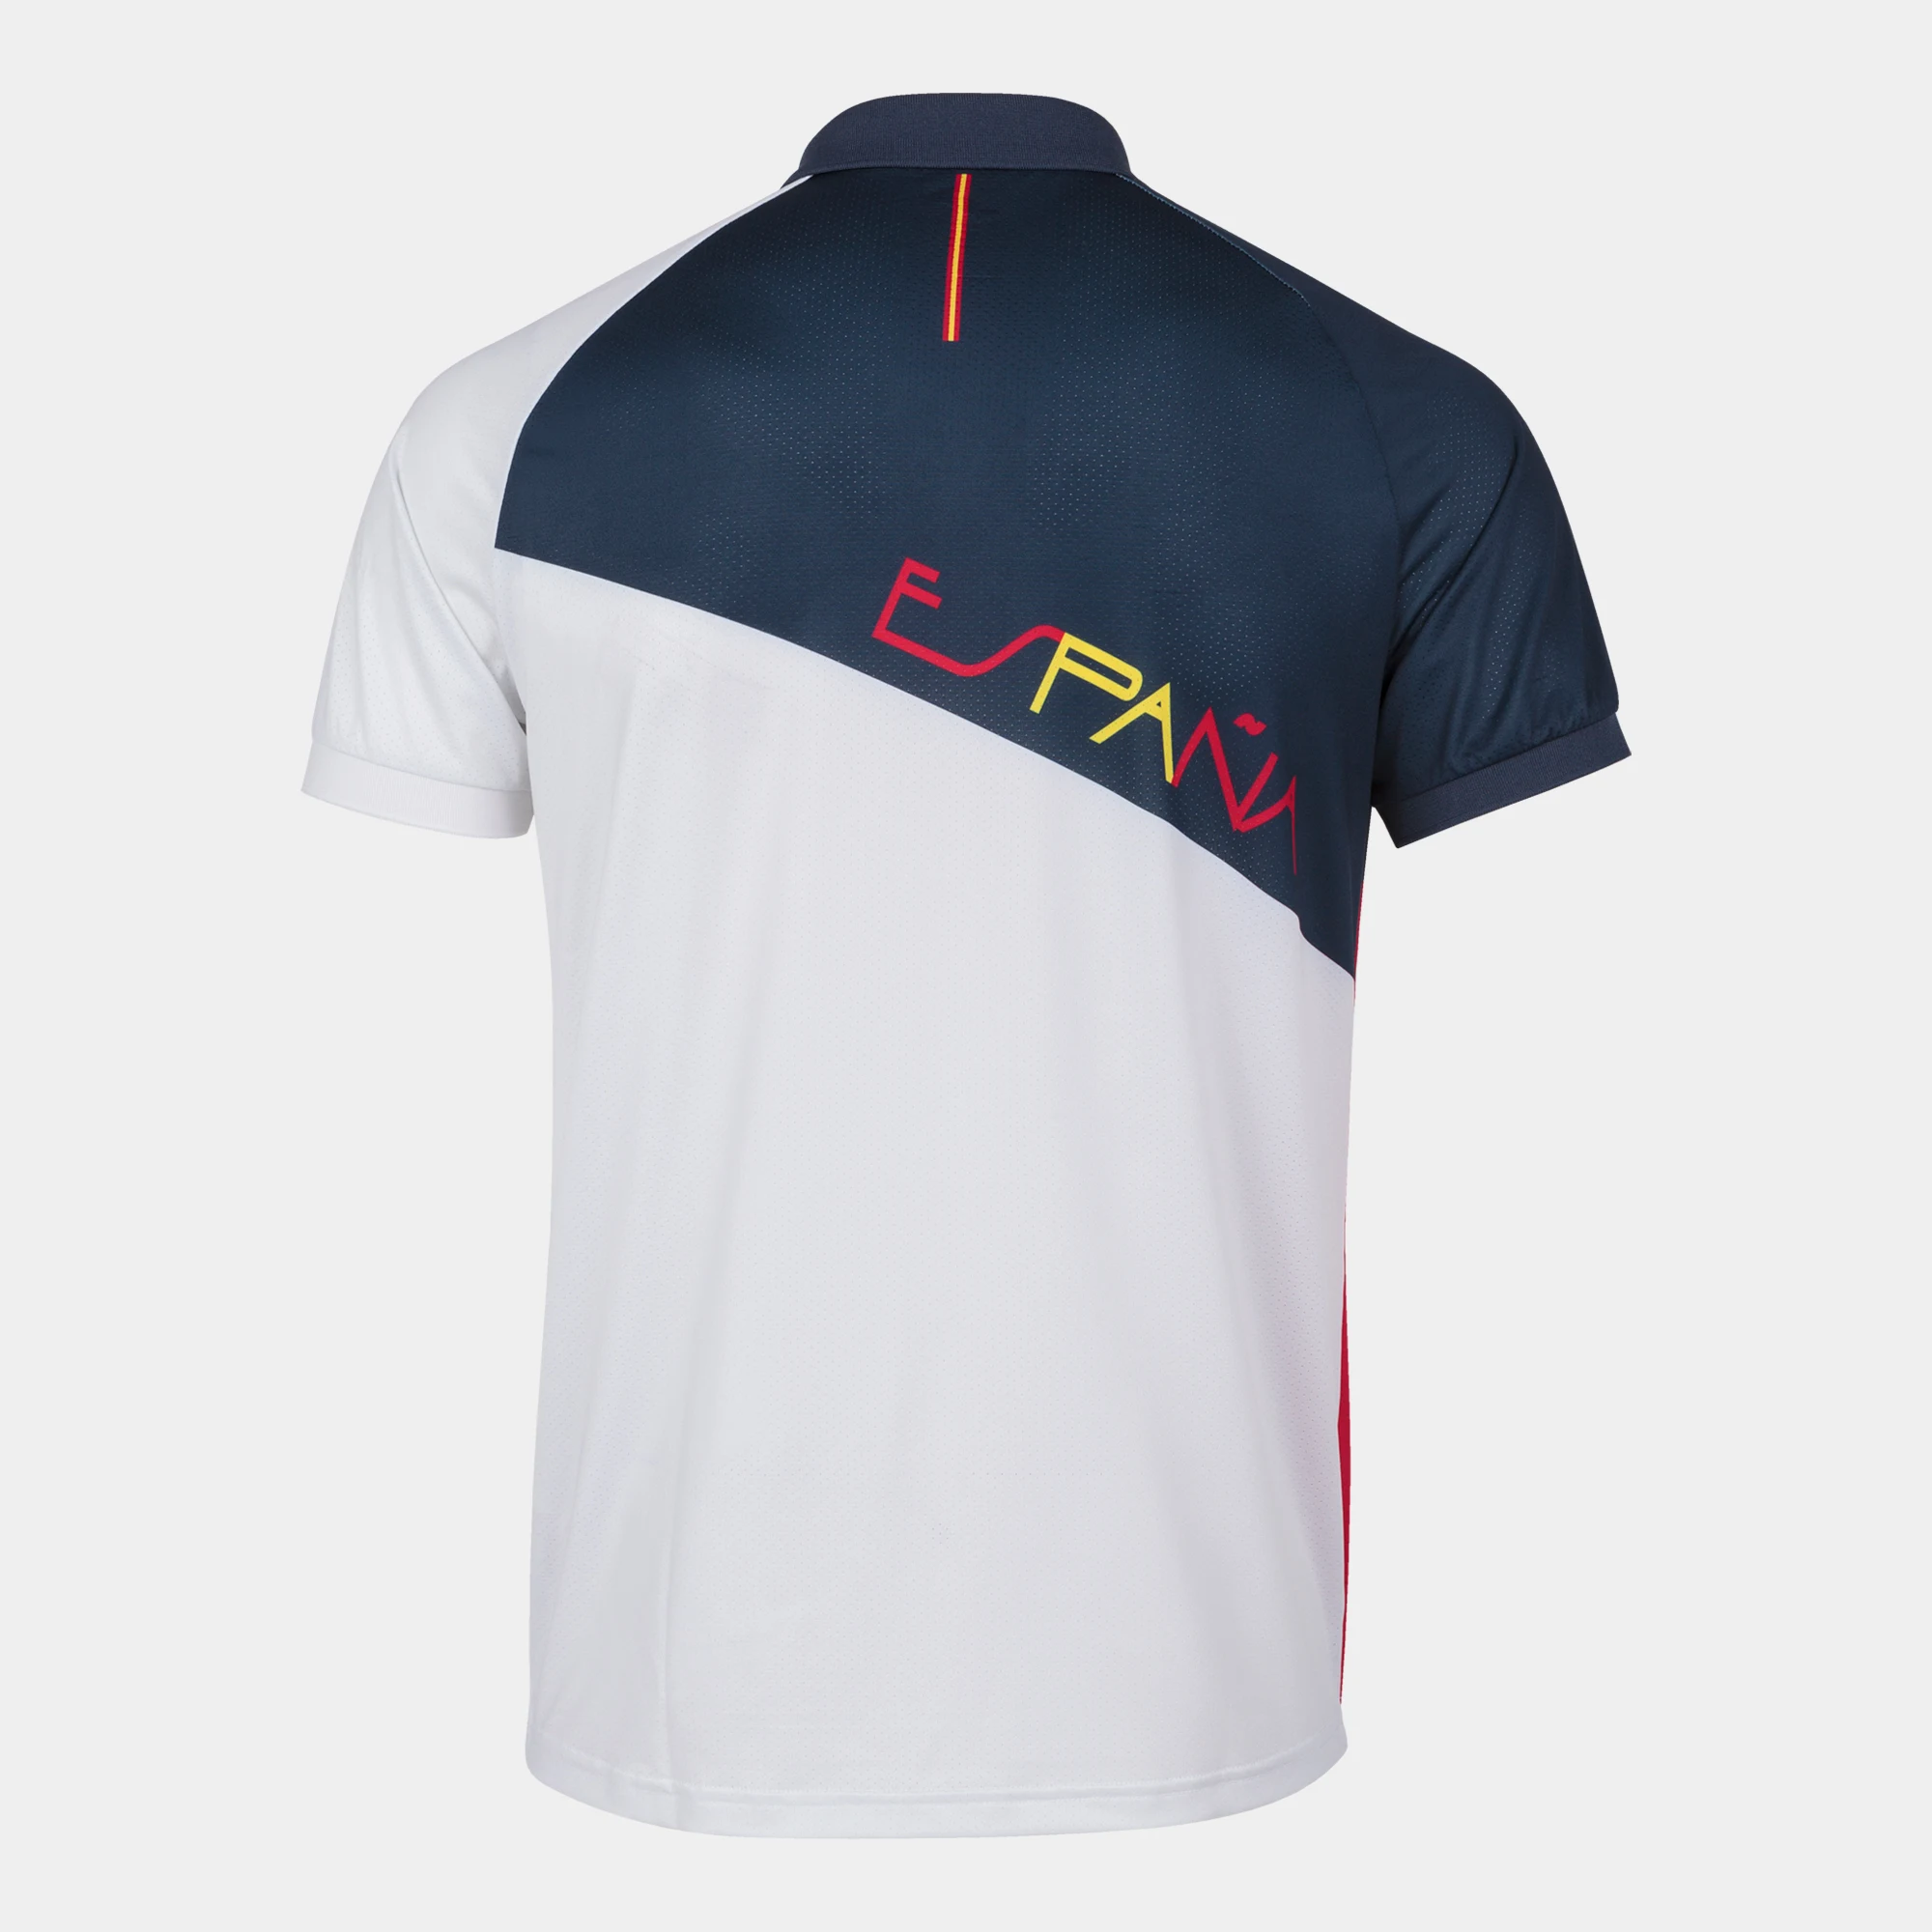 Adición Faringe Superficie lunar Joma Polo Paseo C.o.e Mens Ce.3021.20 Short Sleeve Buttoned Collar  Polyester Breathability Lightness Comfort Sport - Trainning & Exercise  T-shirts - AliExpress